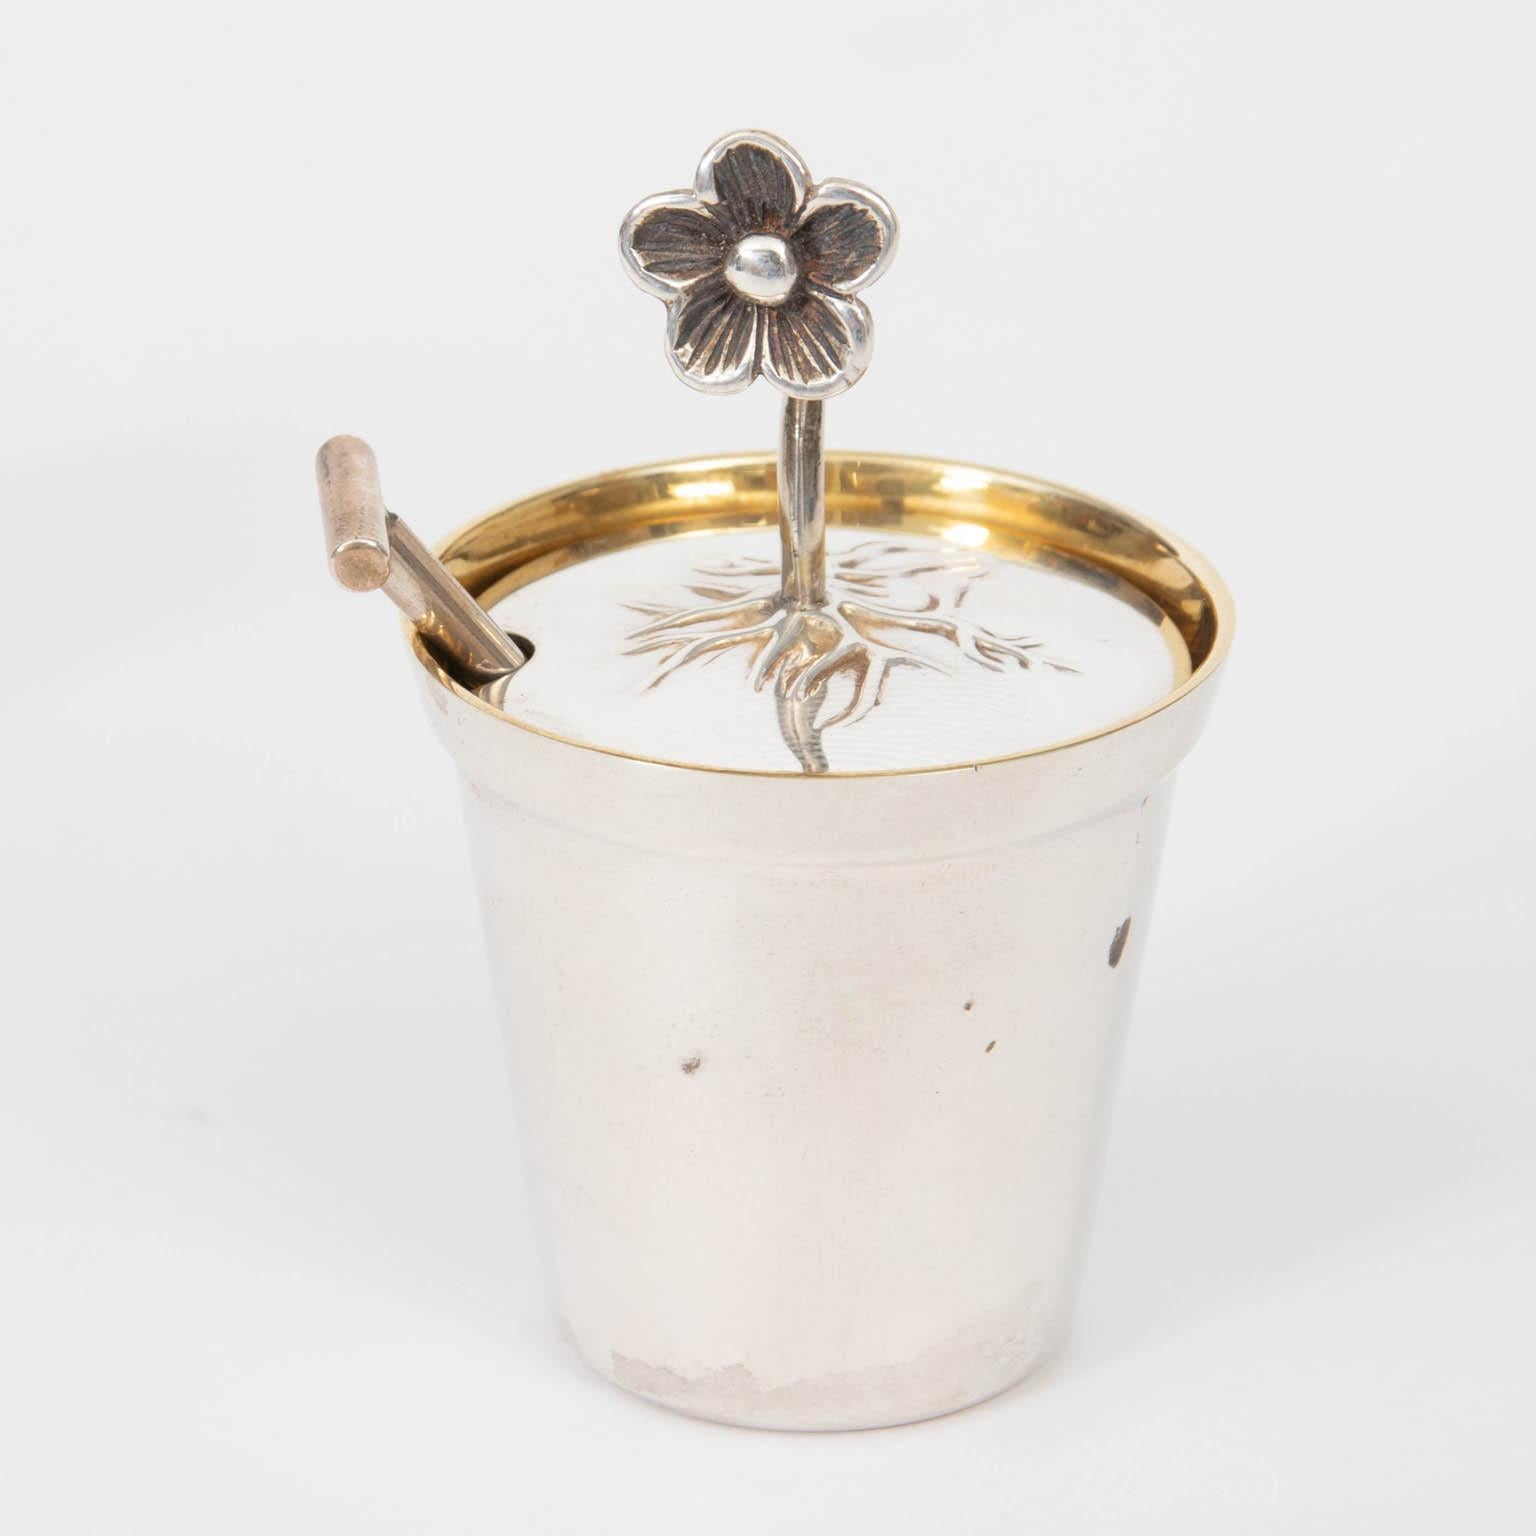 Tiffany & Co. miniature sterling silver watering can and flower pot with spade spoon, circa 20th century. Hallmarked sterling silver. Weight 75.5 Grams. Made in the United States. Please note of wear consistent with age. The bucket measures 1.00